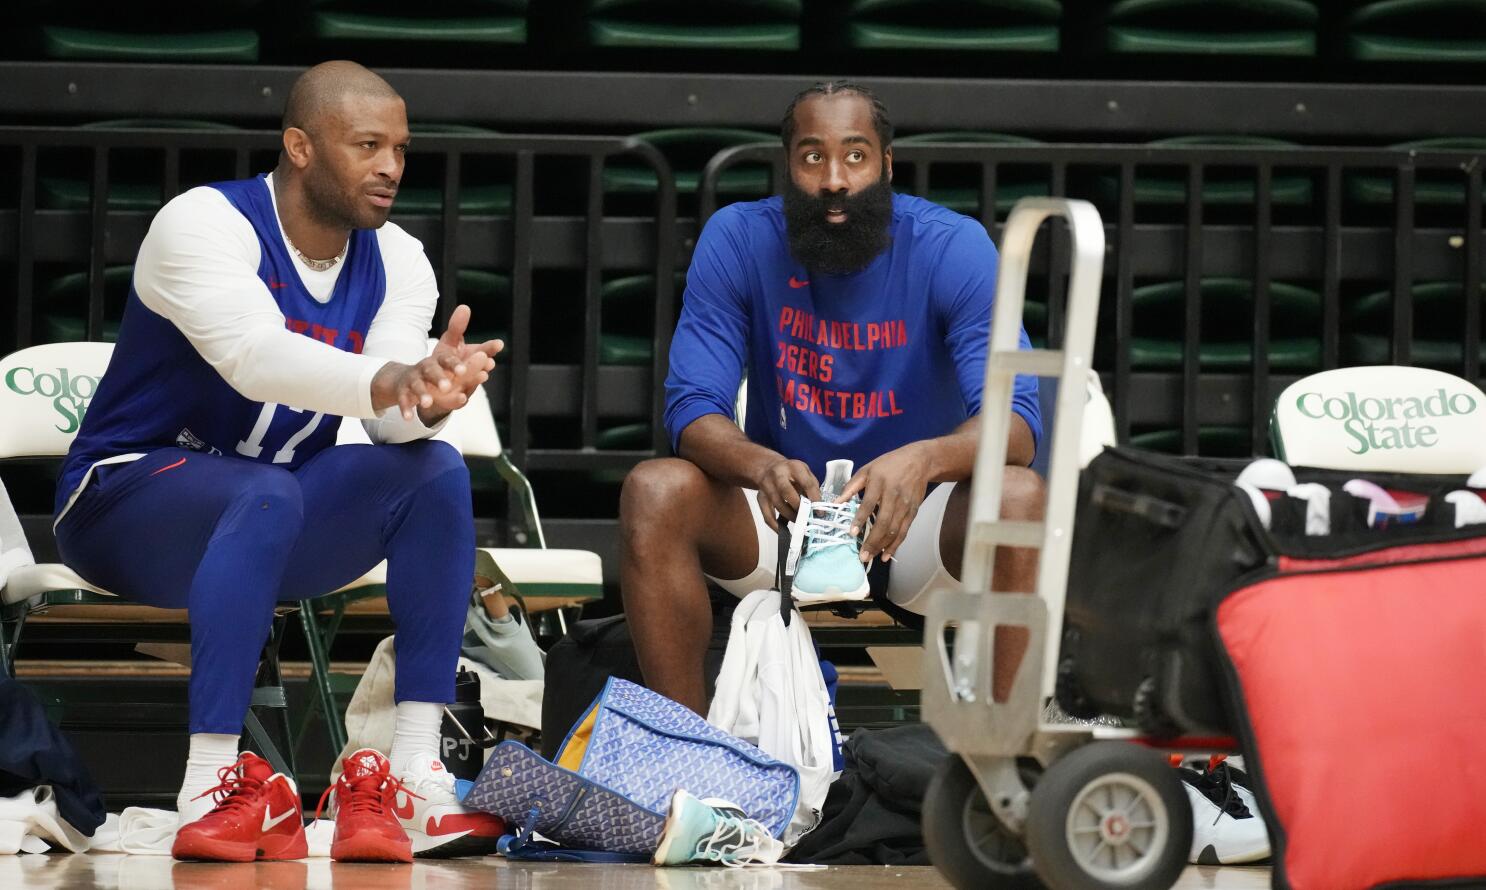 Sixers' James Harden and Joel Embiid finish top 10 in jersey sales